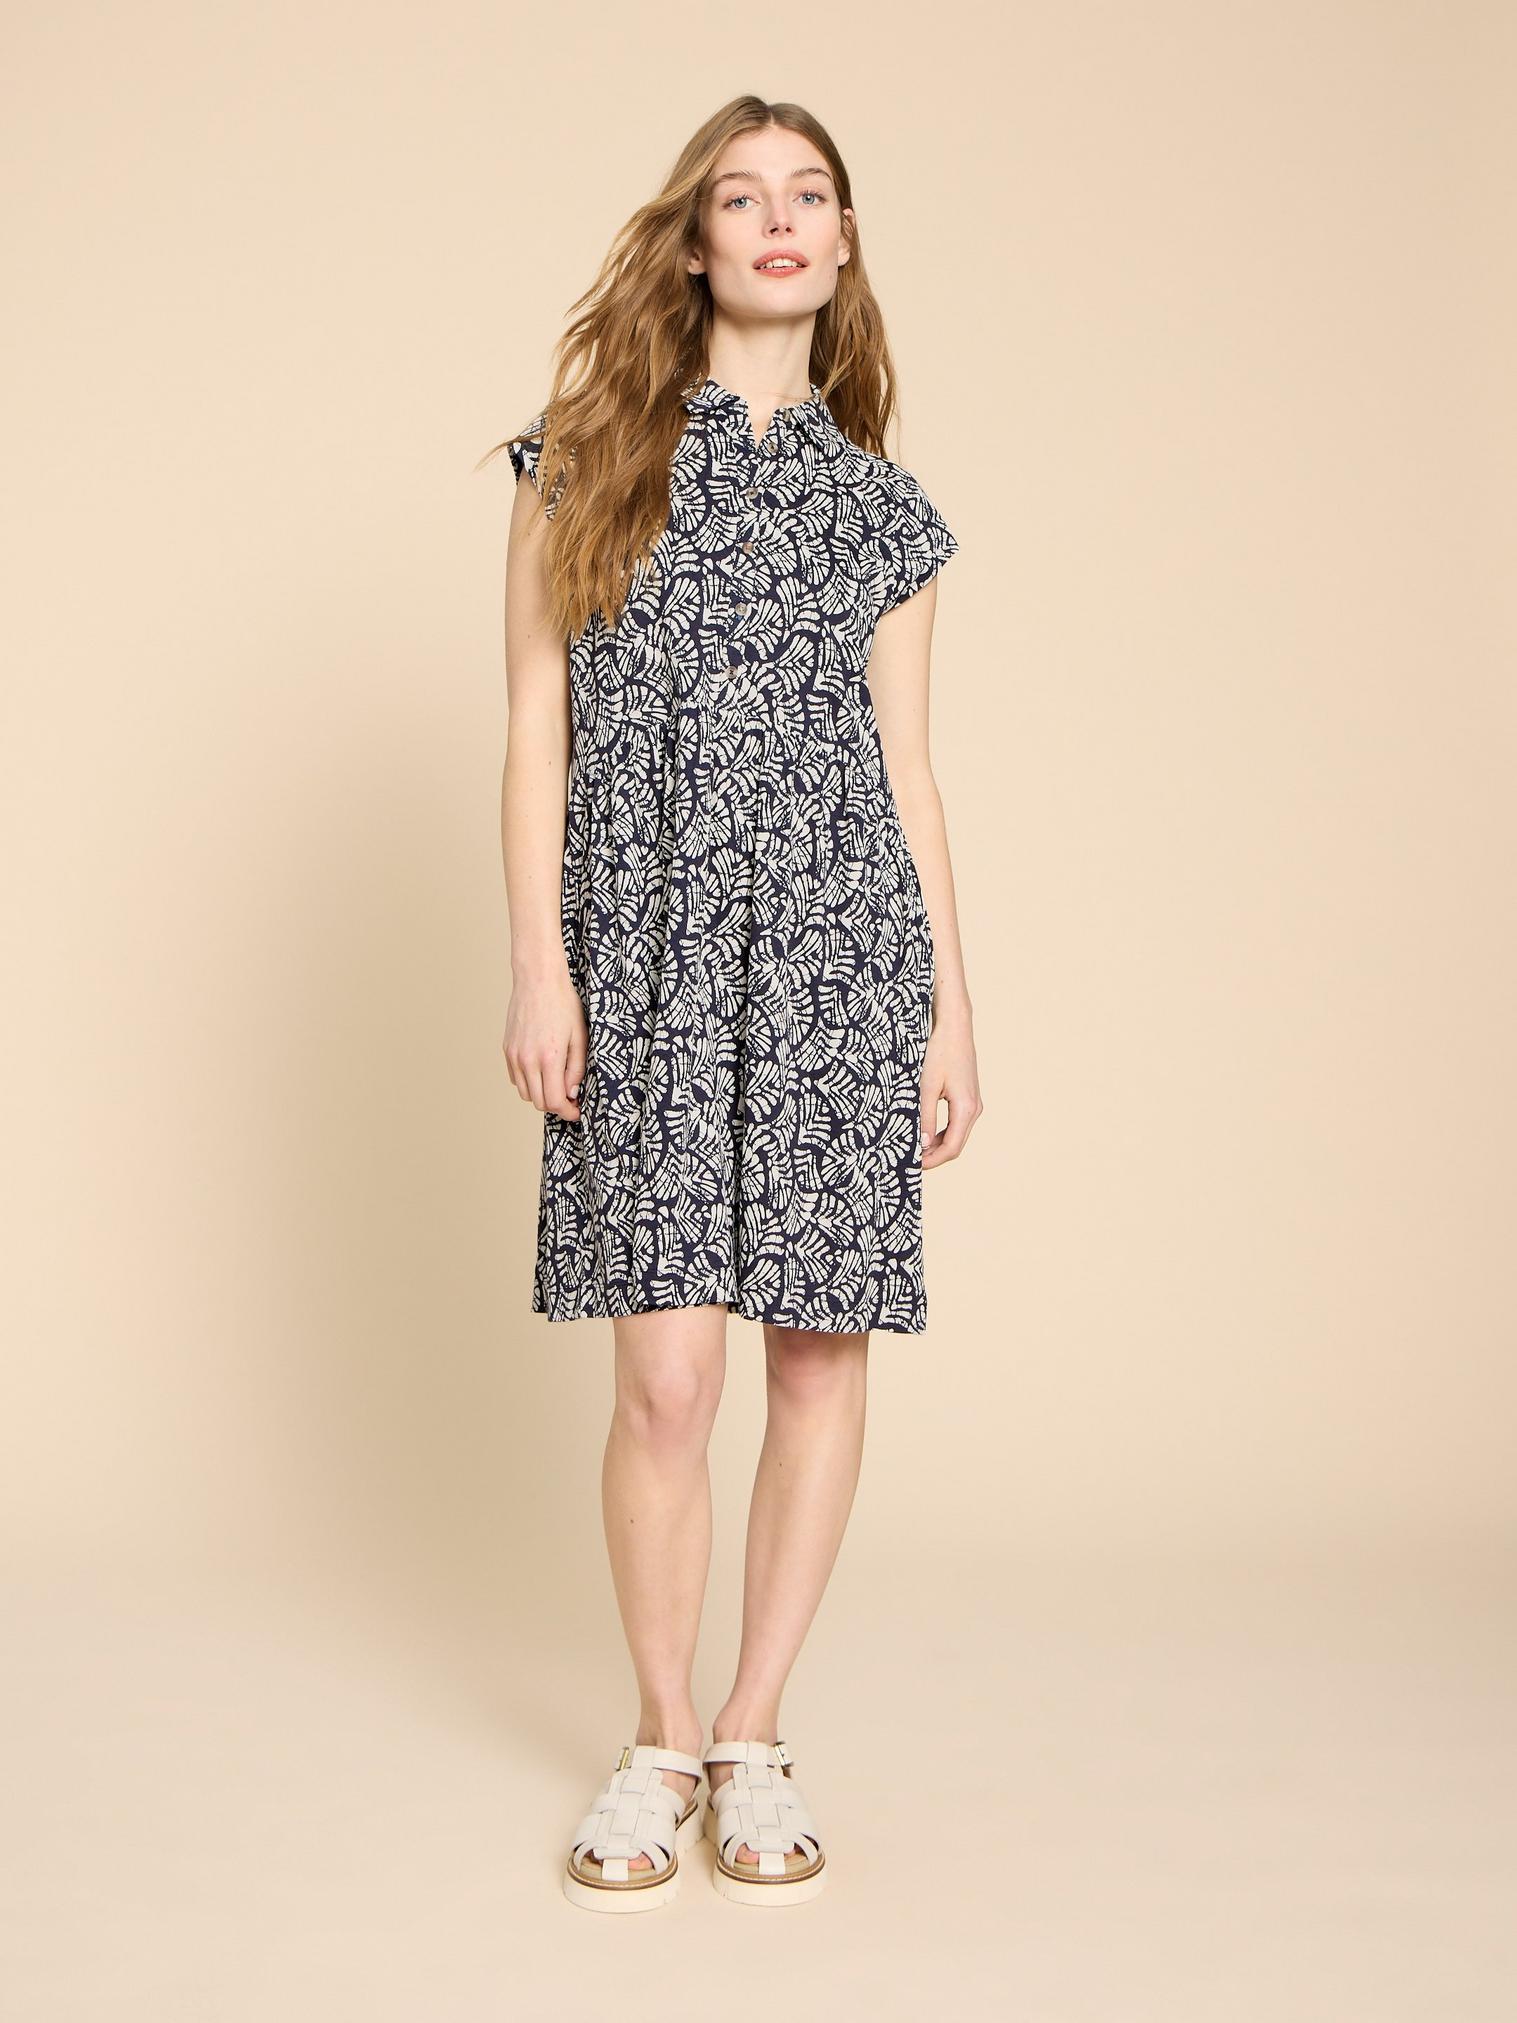 Everly Printed Jersey Shirt Dress in NAVY PR - LIFESTYLE